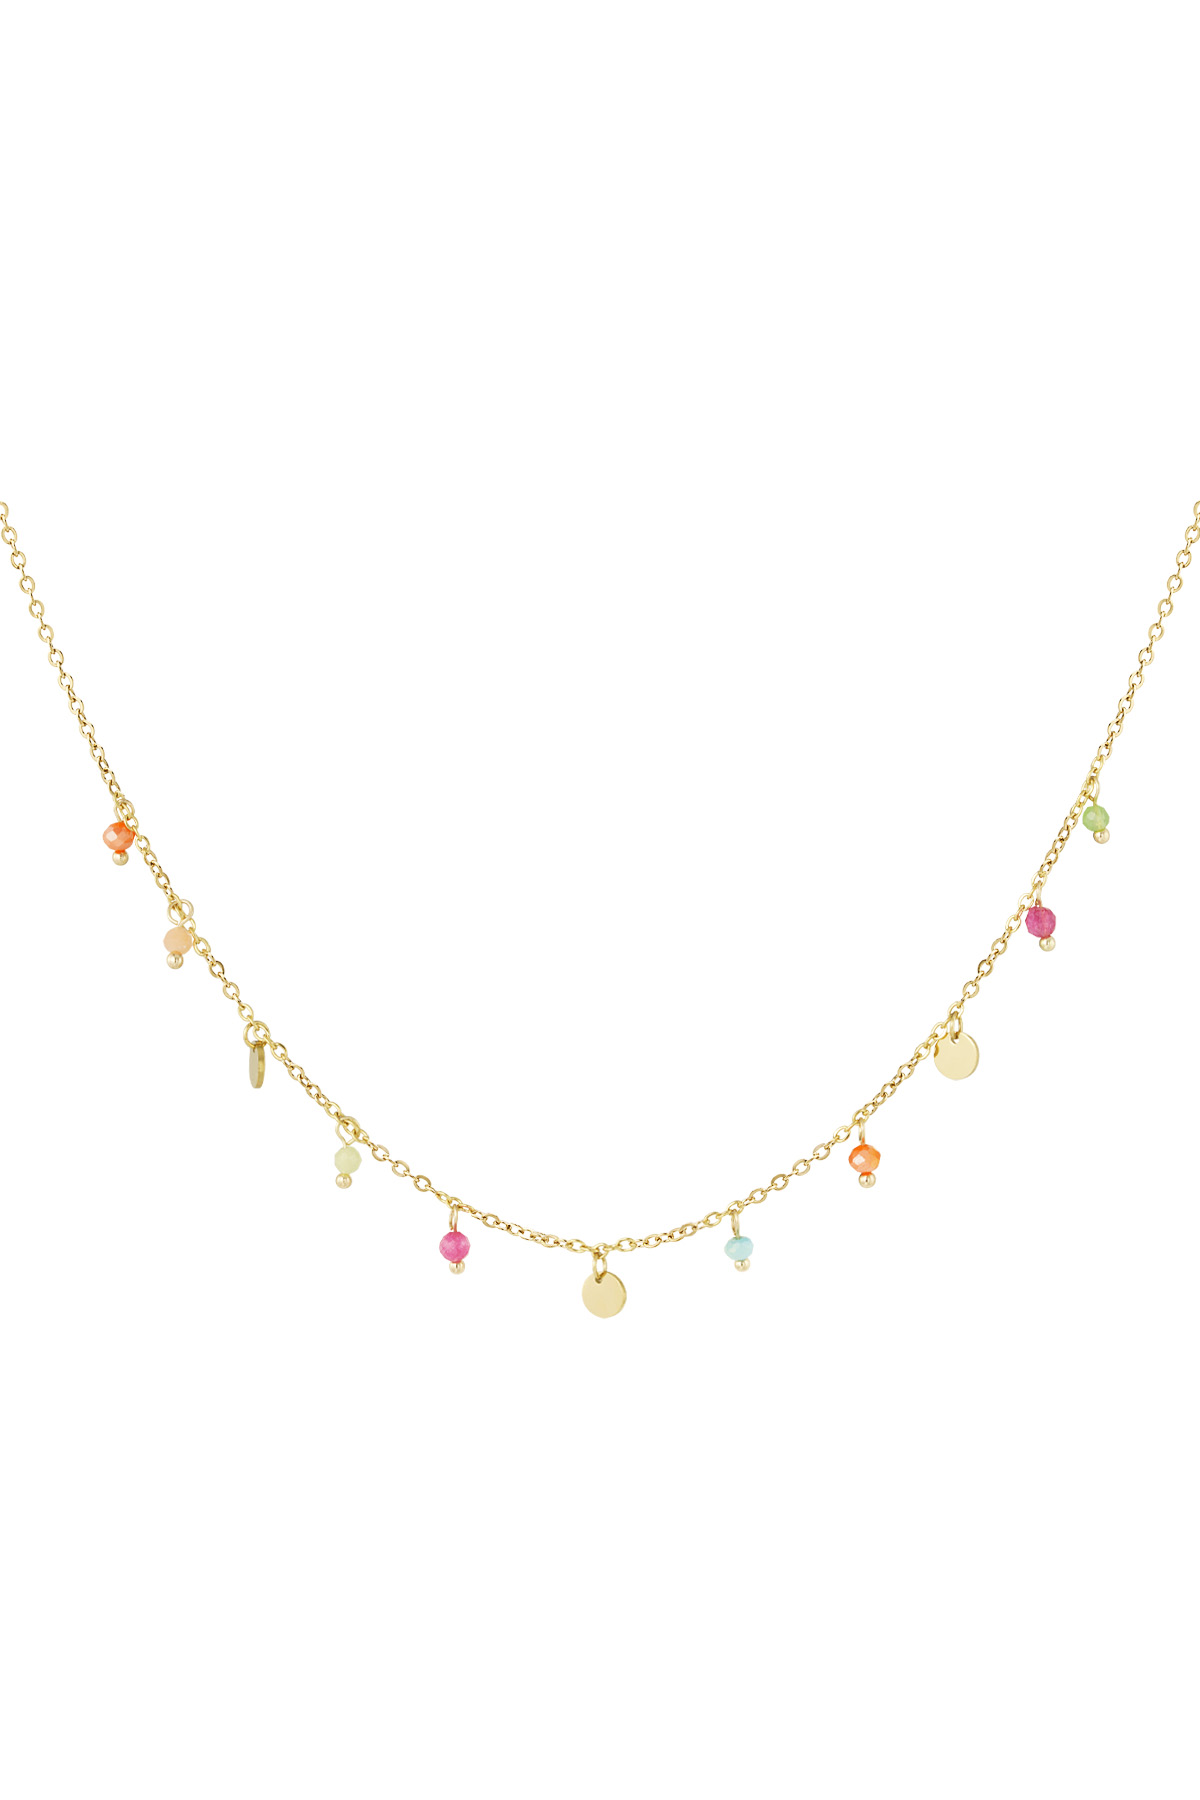 Charm necklace colorful day - gold